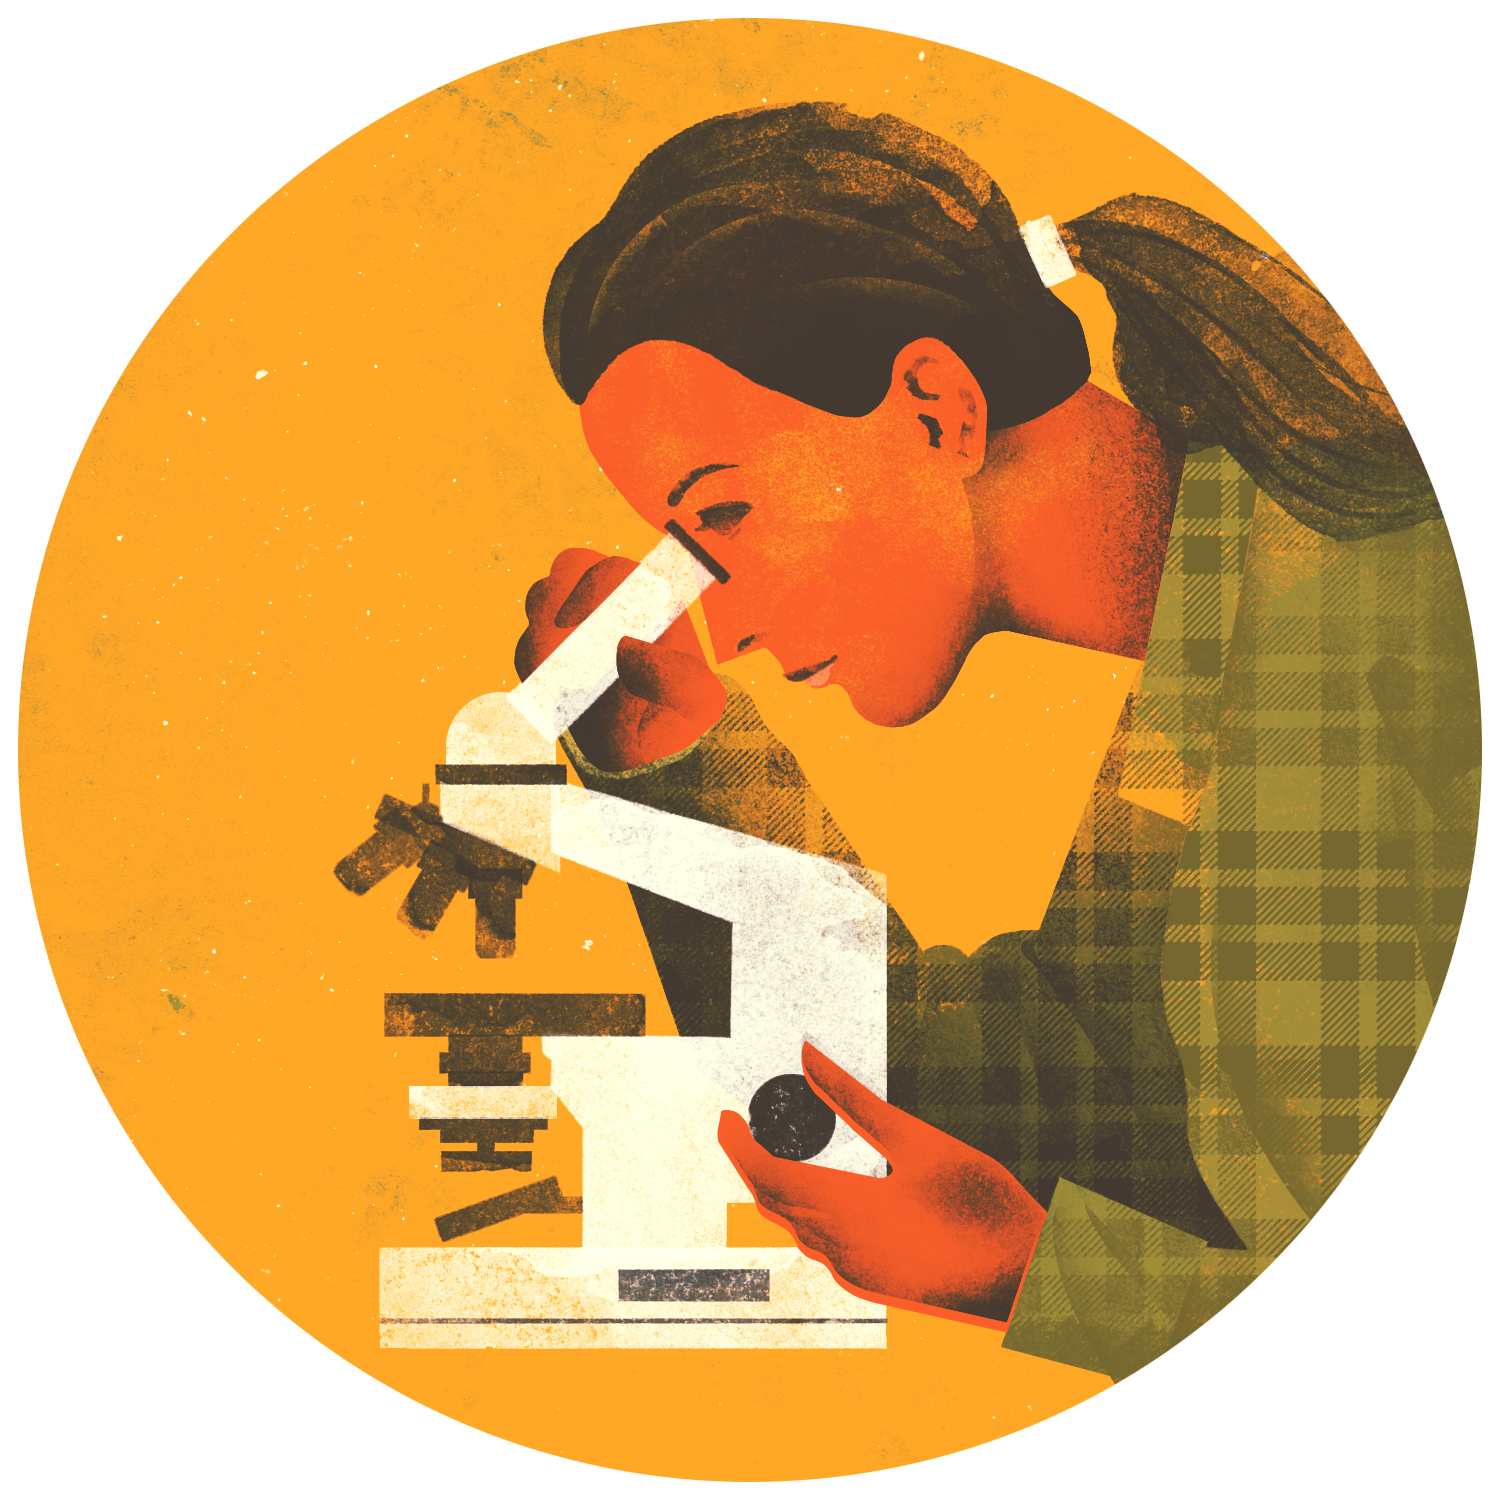 An illustration of a person looking into a microscope